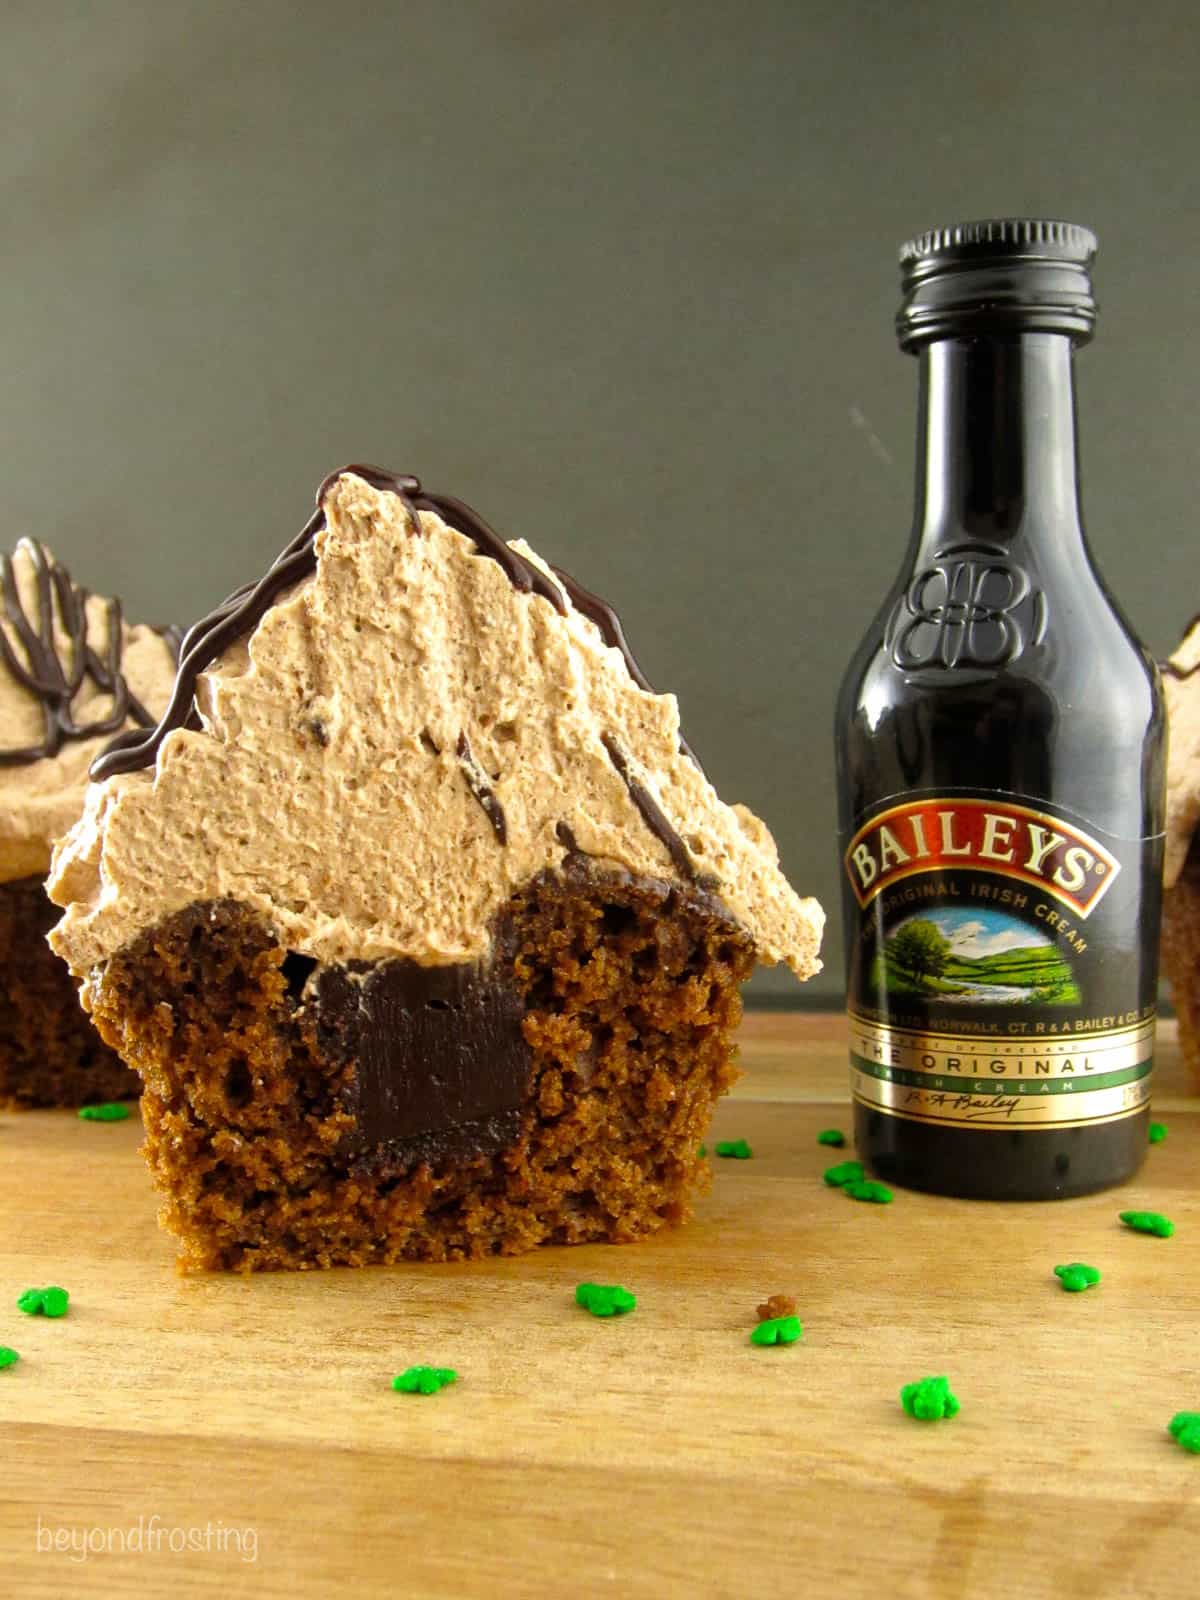 side view of an irish cream cupcake cut in half and set next to a small bottle of Baileys